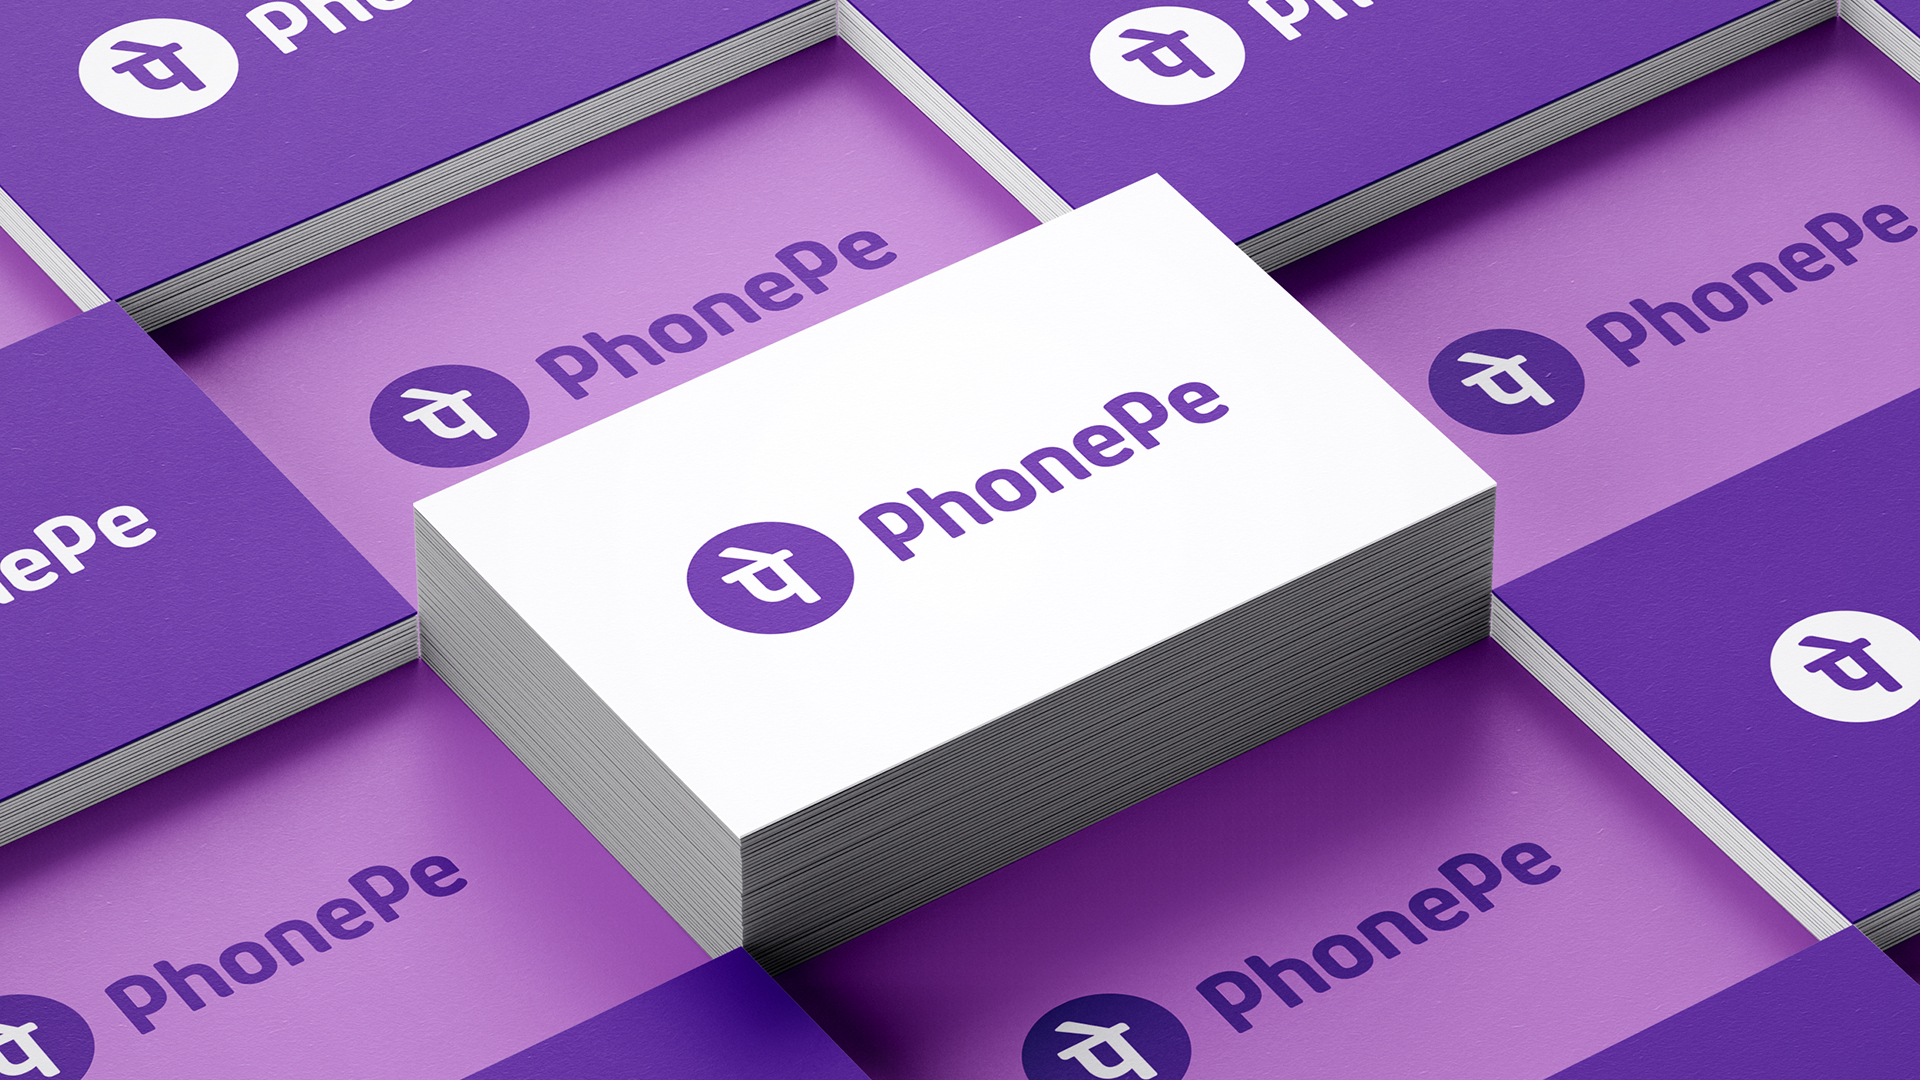 PhonePe responds to MP Congress on alleged usage of brand logo-cheohanoi.vn